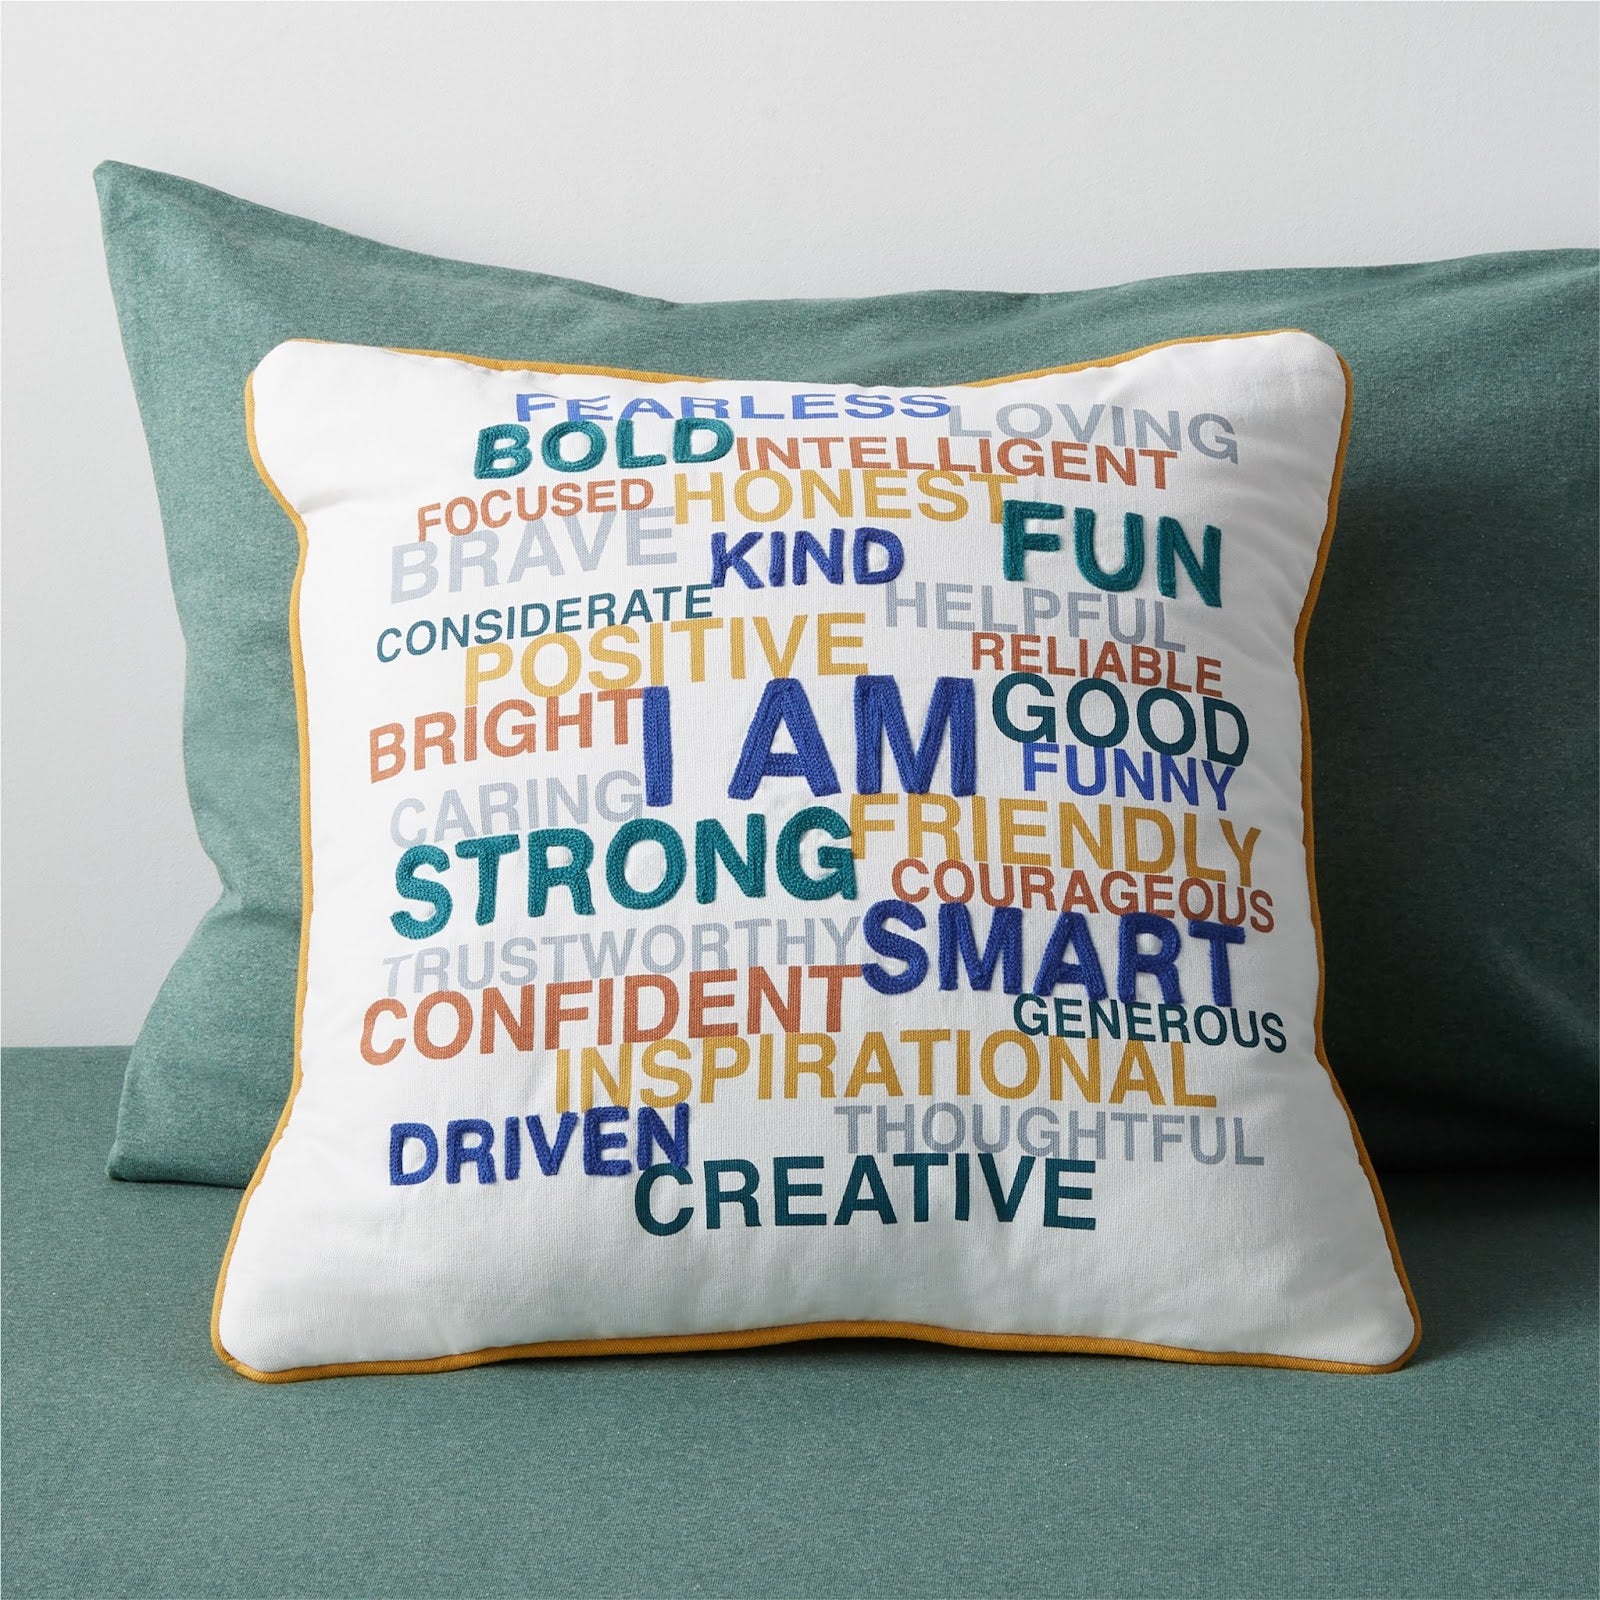 This Teen Social Entrepreneur Pitched A Business Idea To Crate & Barrel–Now They’re Carrying His Line Of Positive Affirmation Pillows